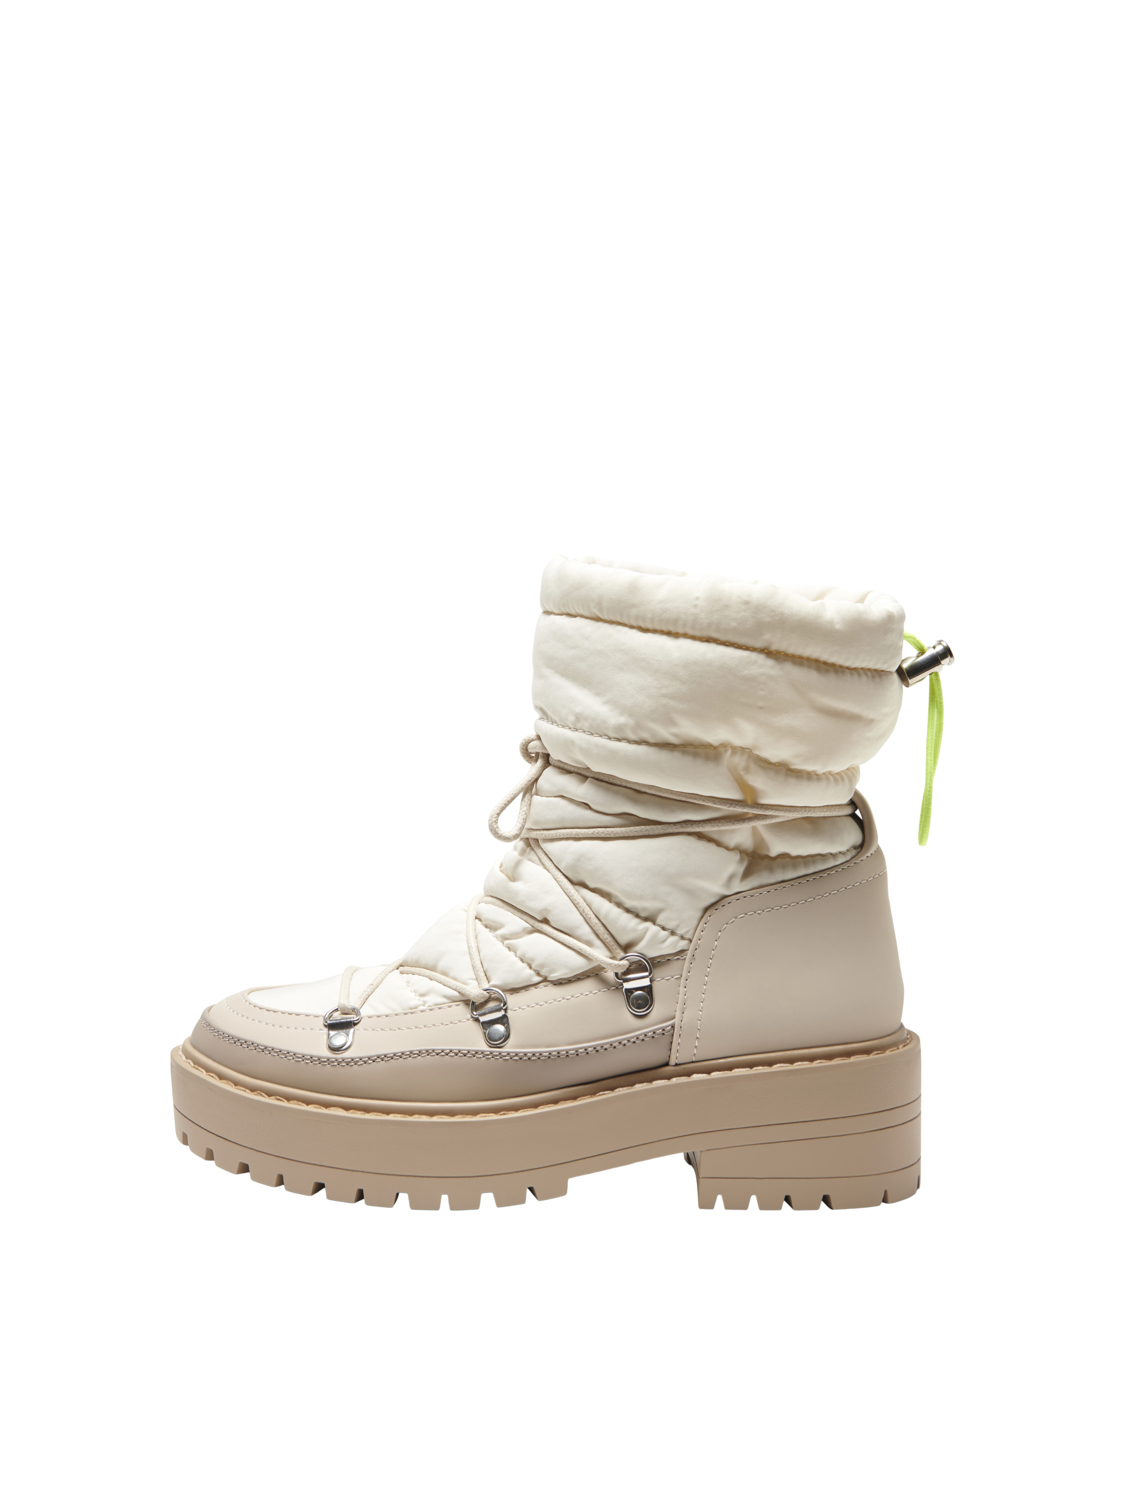 FINAL SALE - Brandie moon boots, WHITE, large